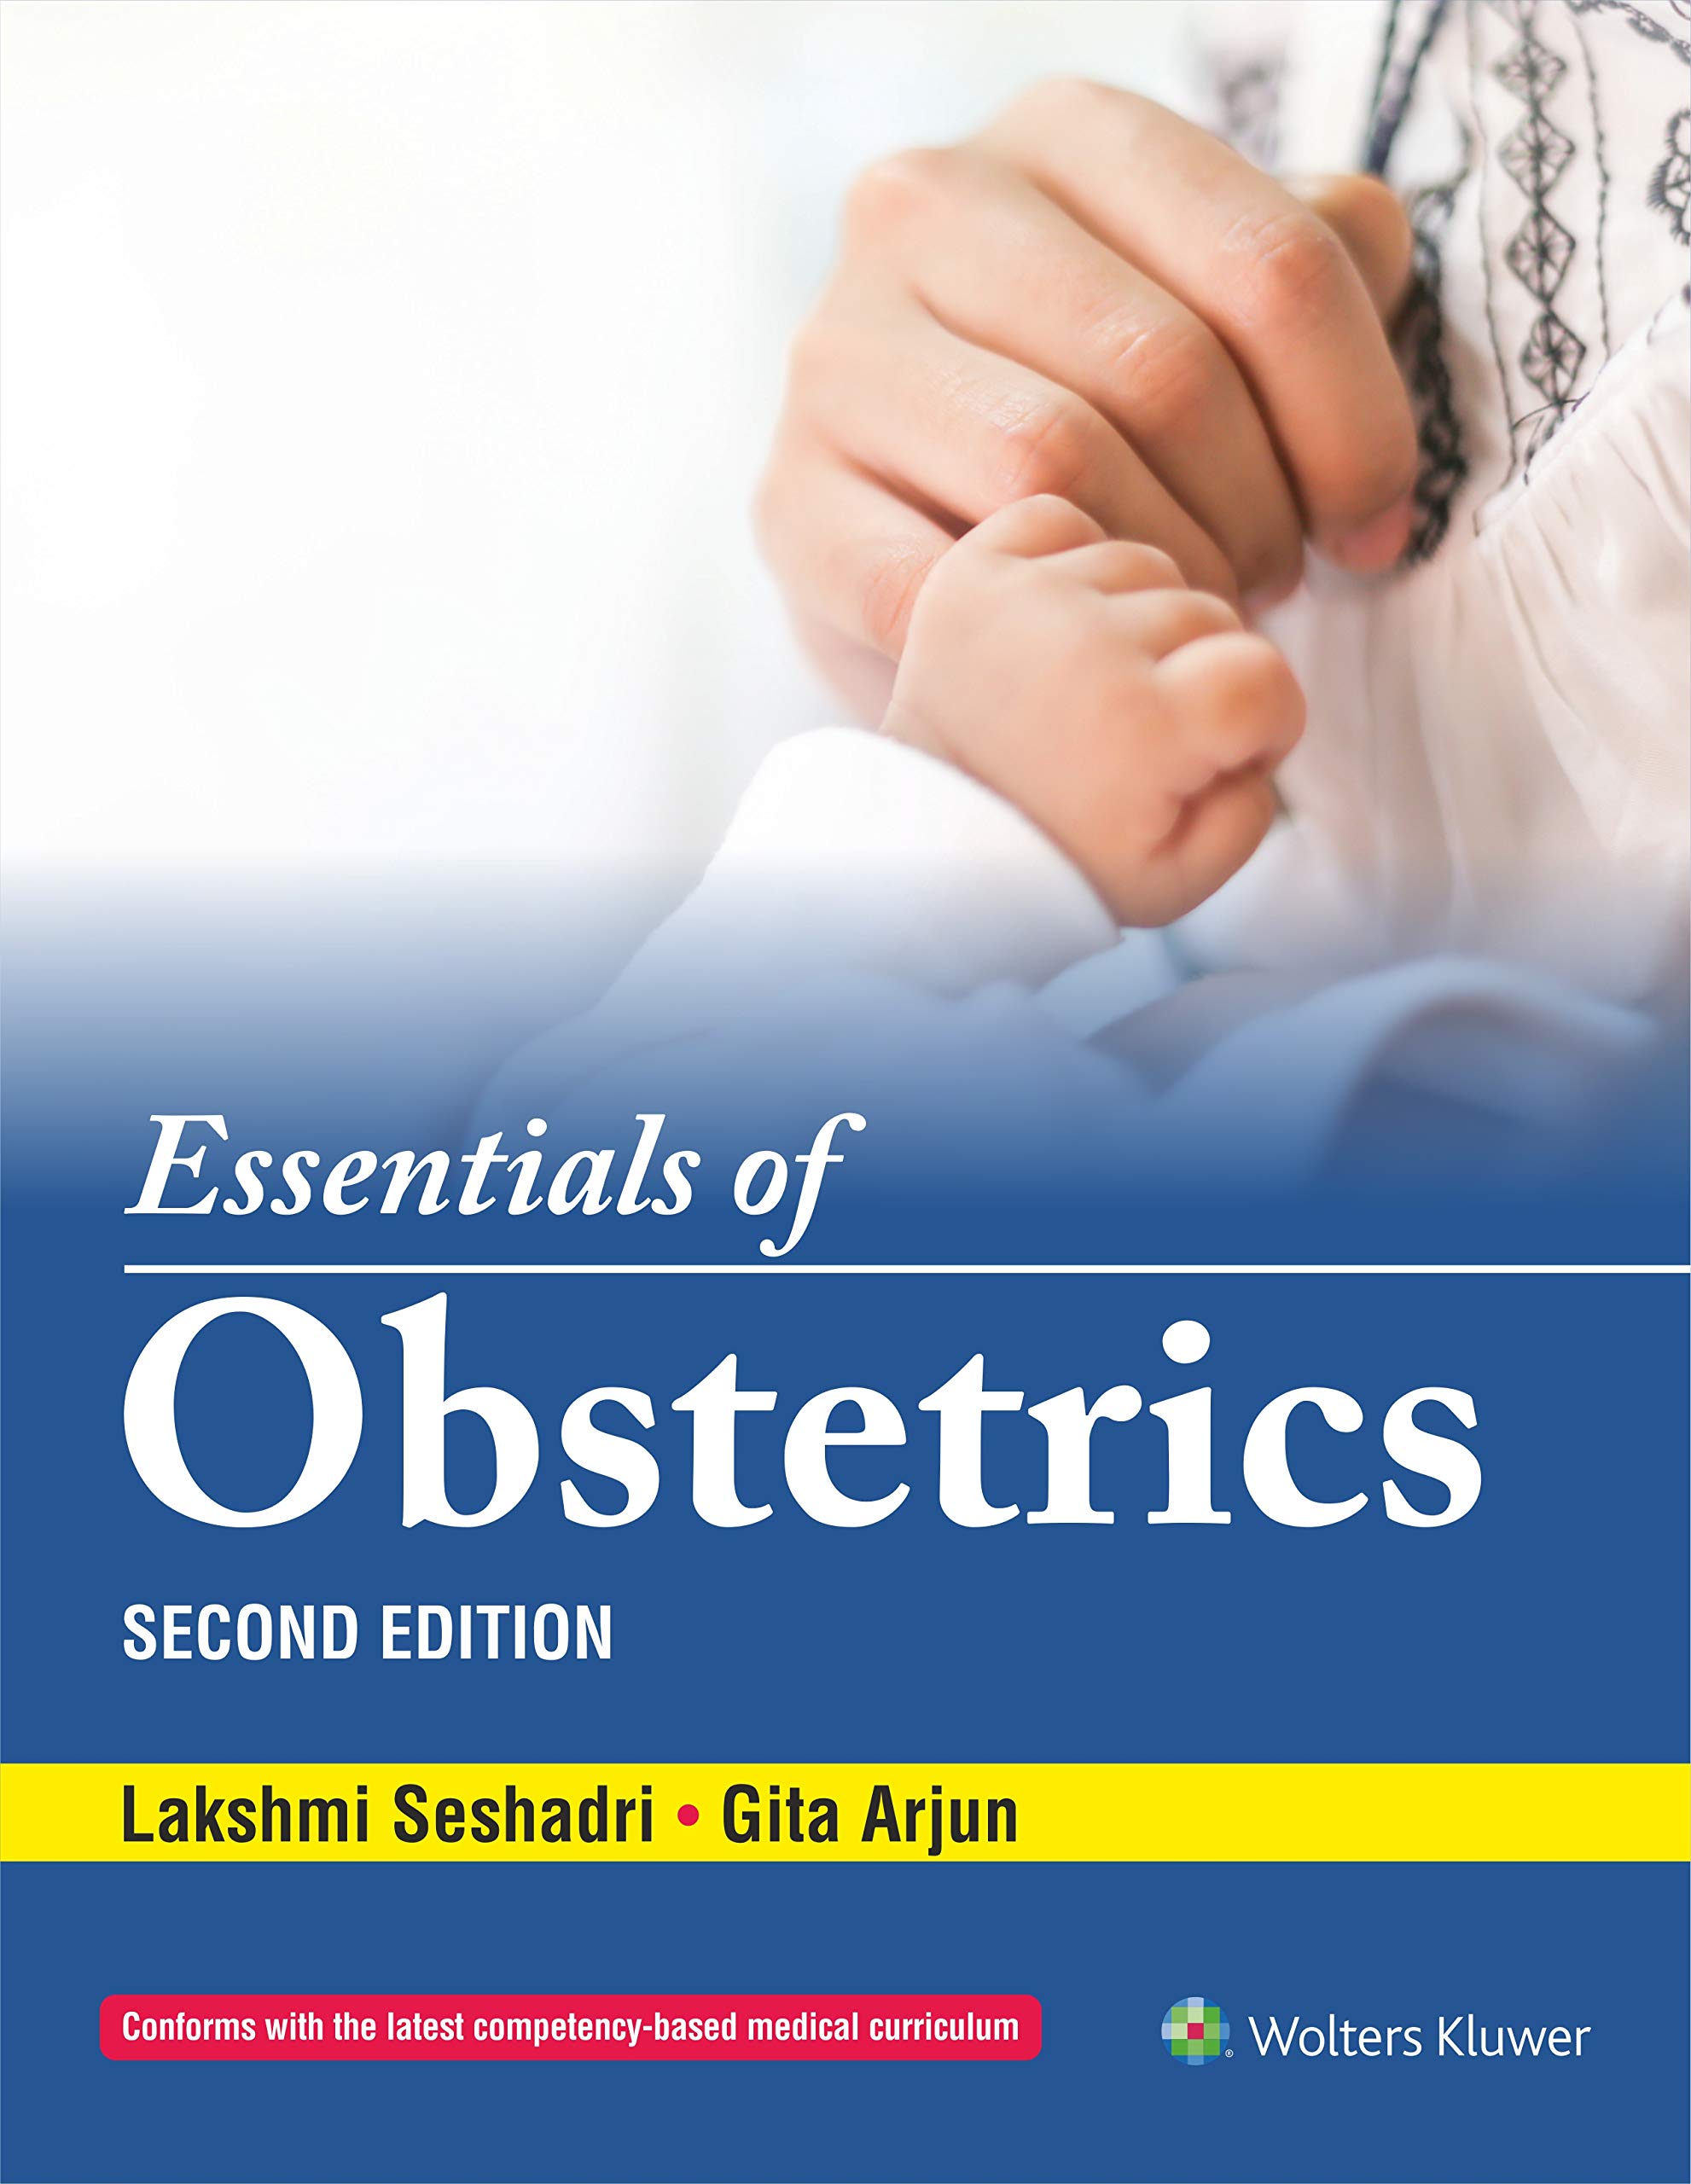 ESSENTIALS OF OBSTETRICS, 2ND EDITION